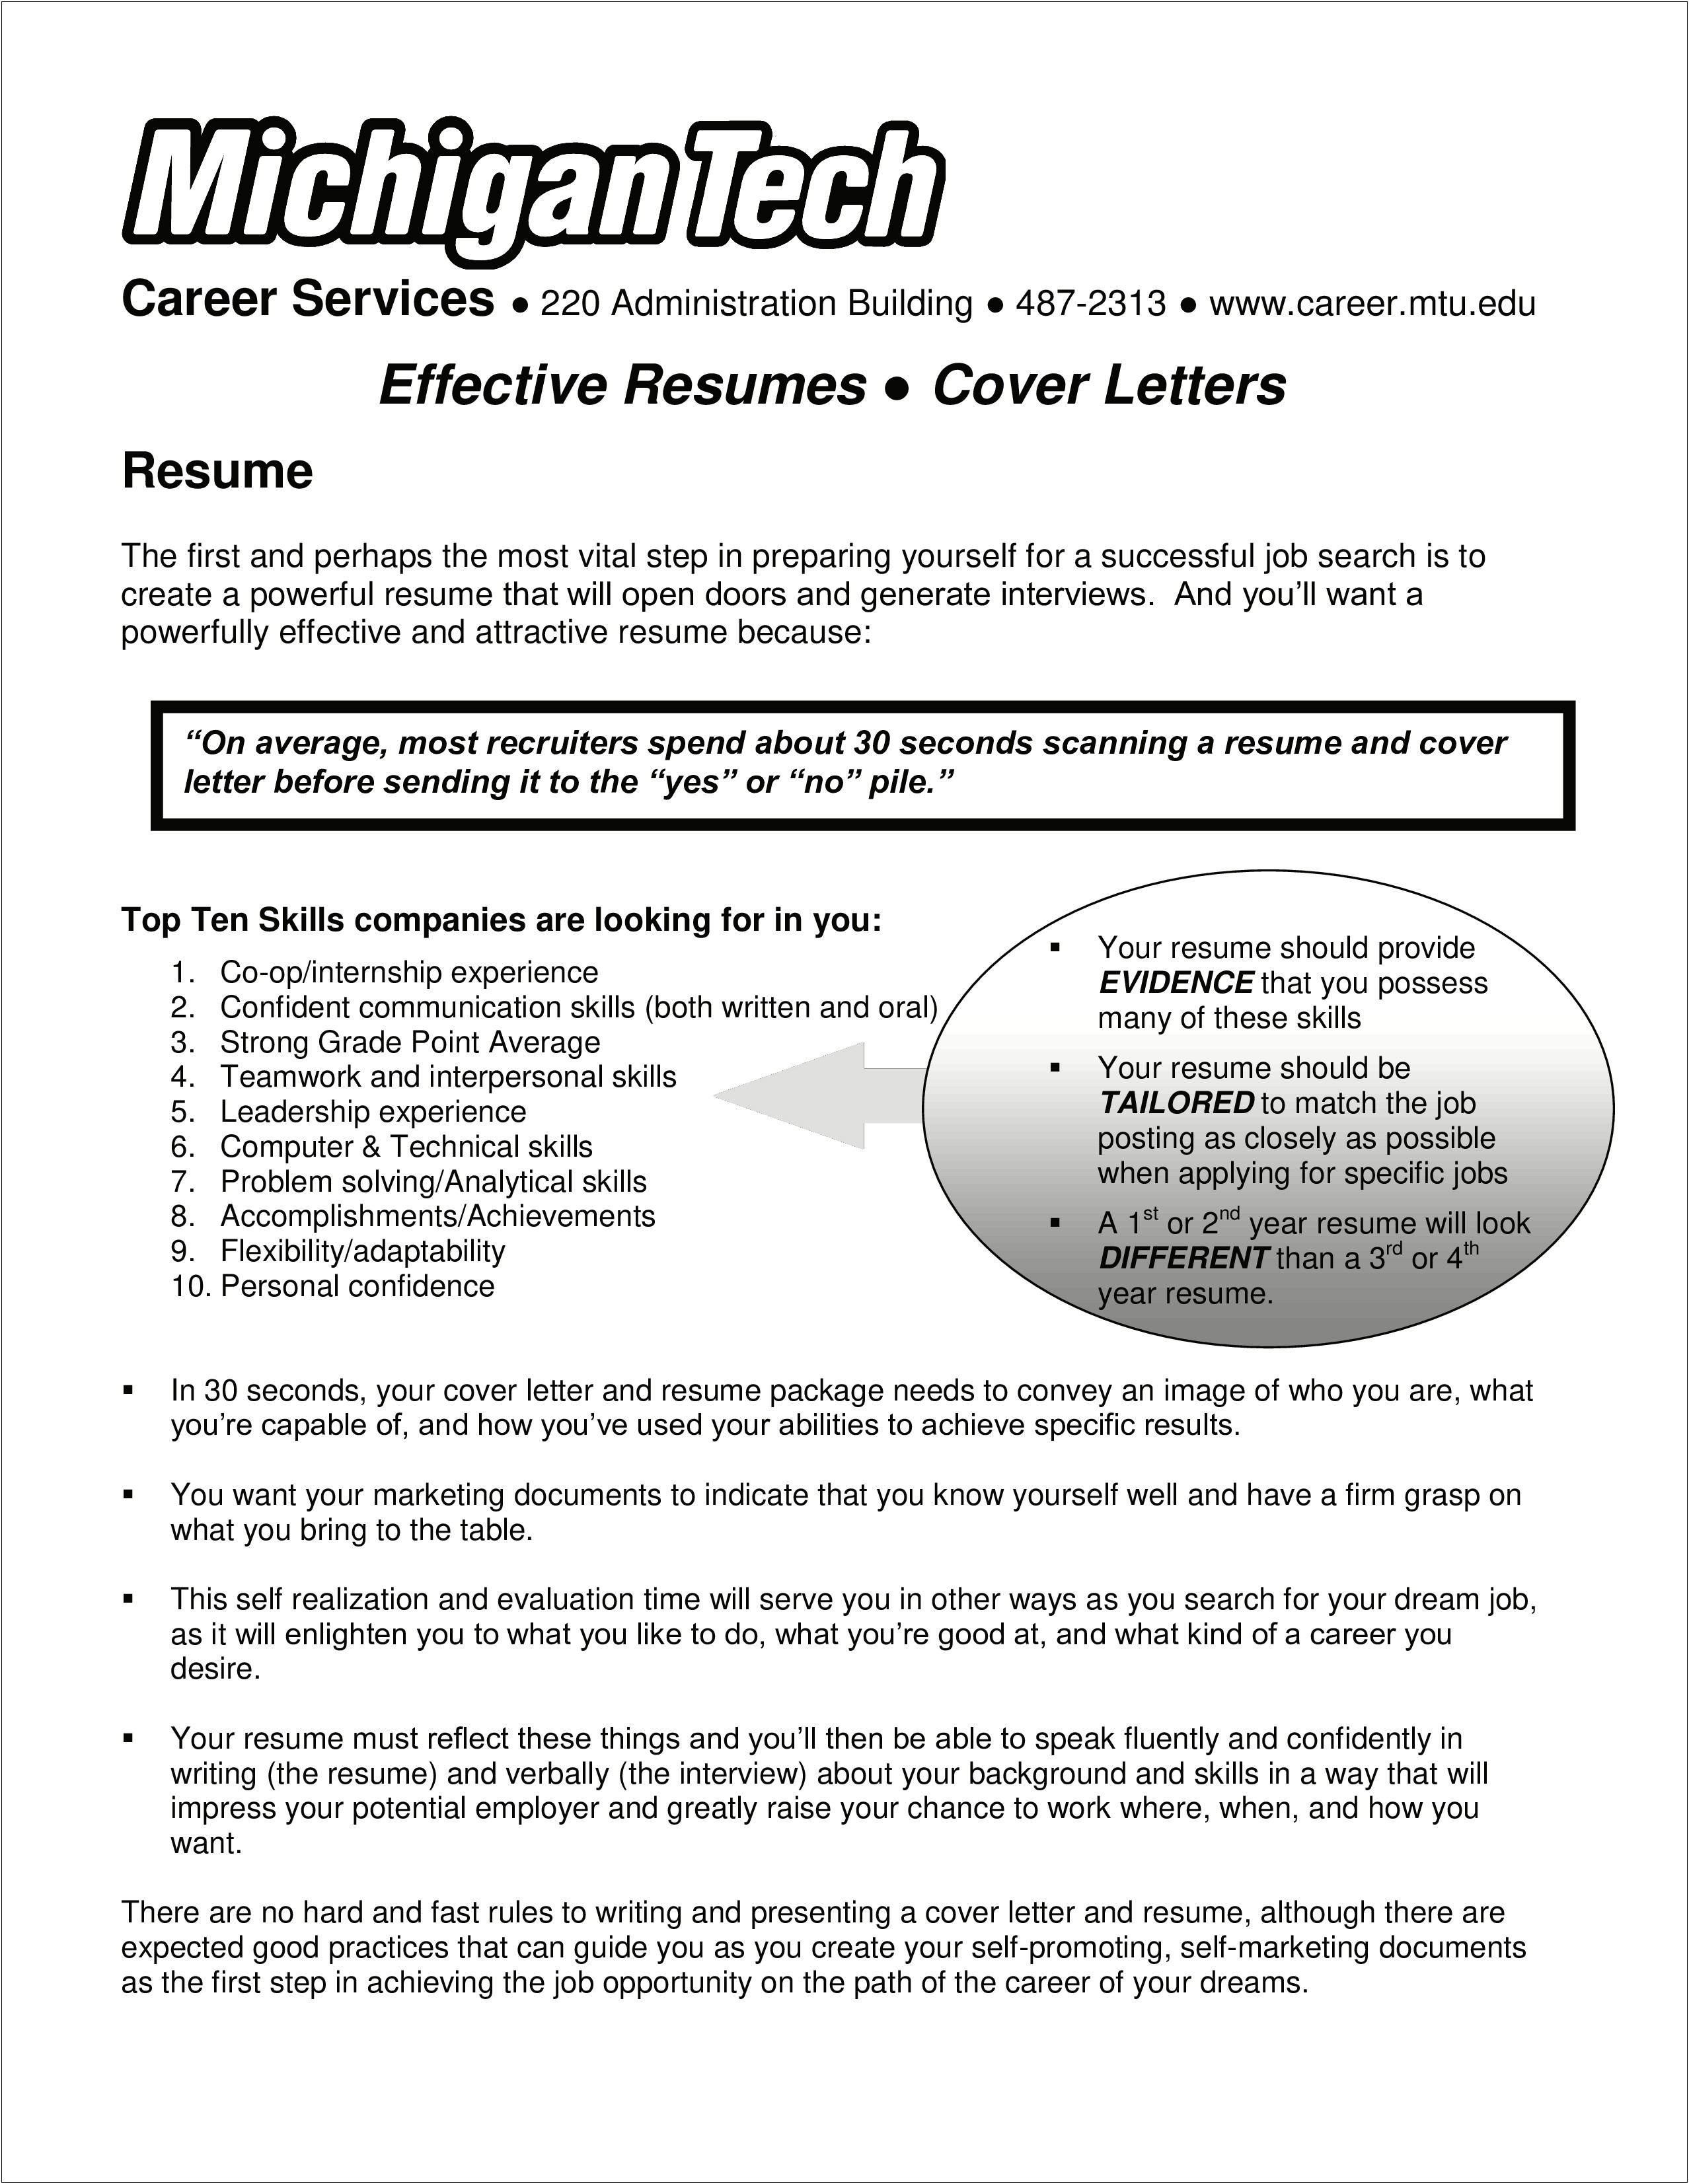 Jobs Resumes Cover Letters Resume